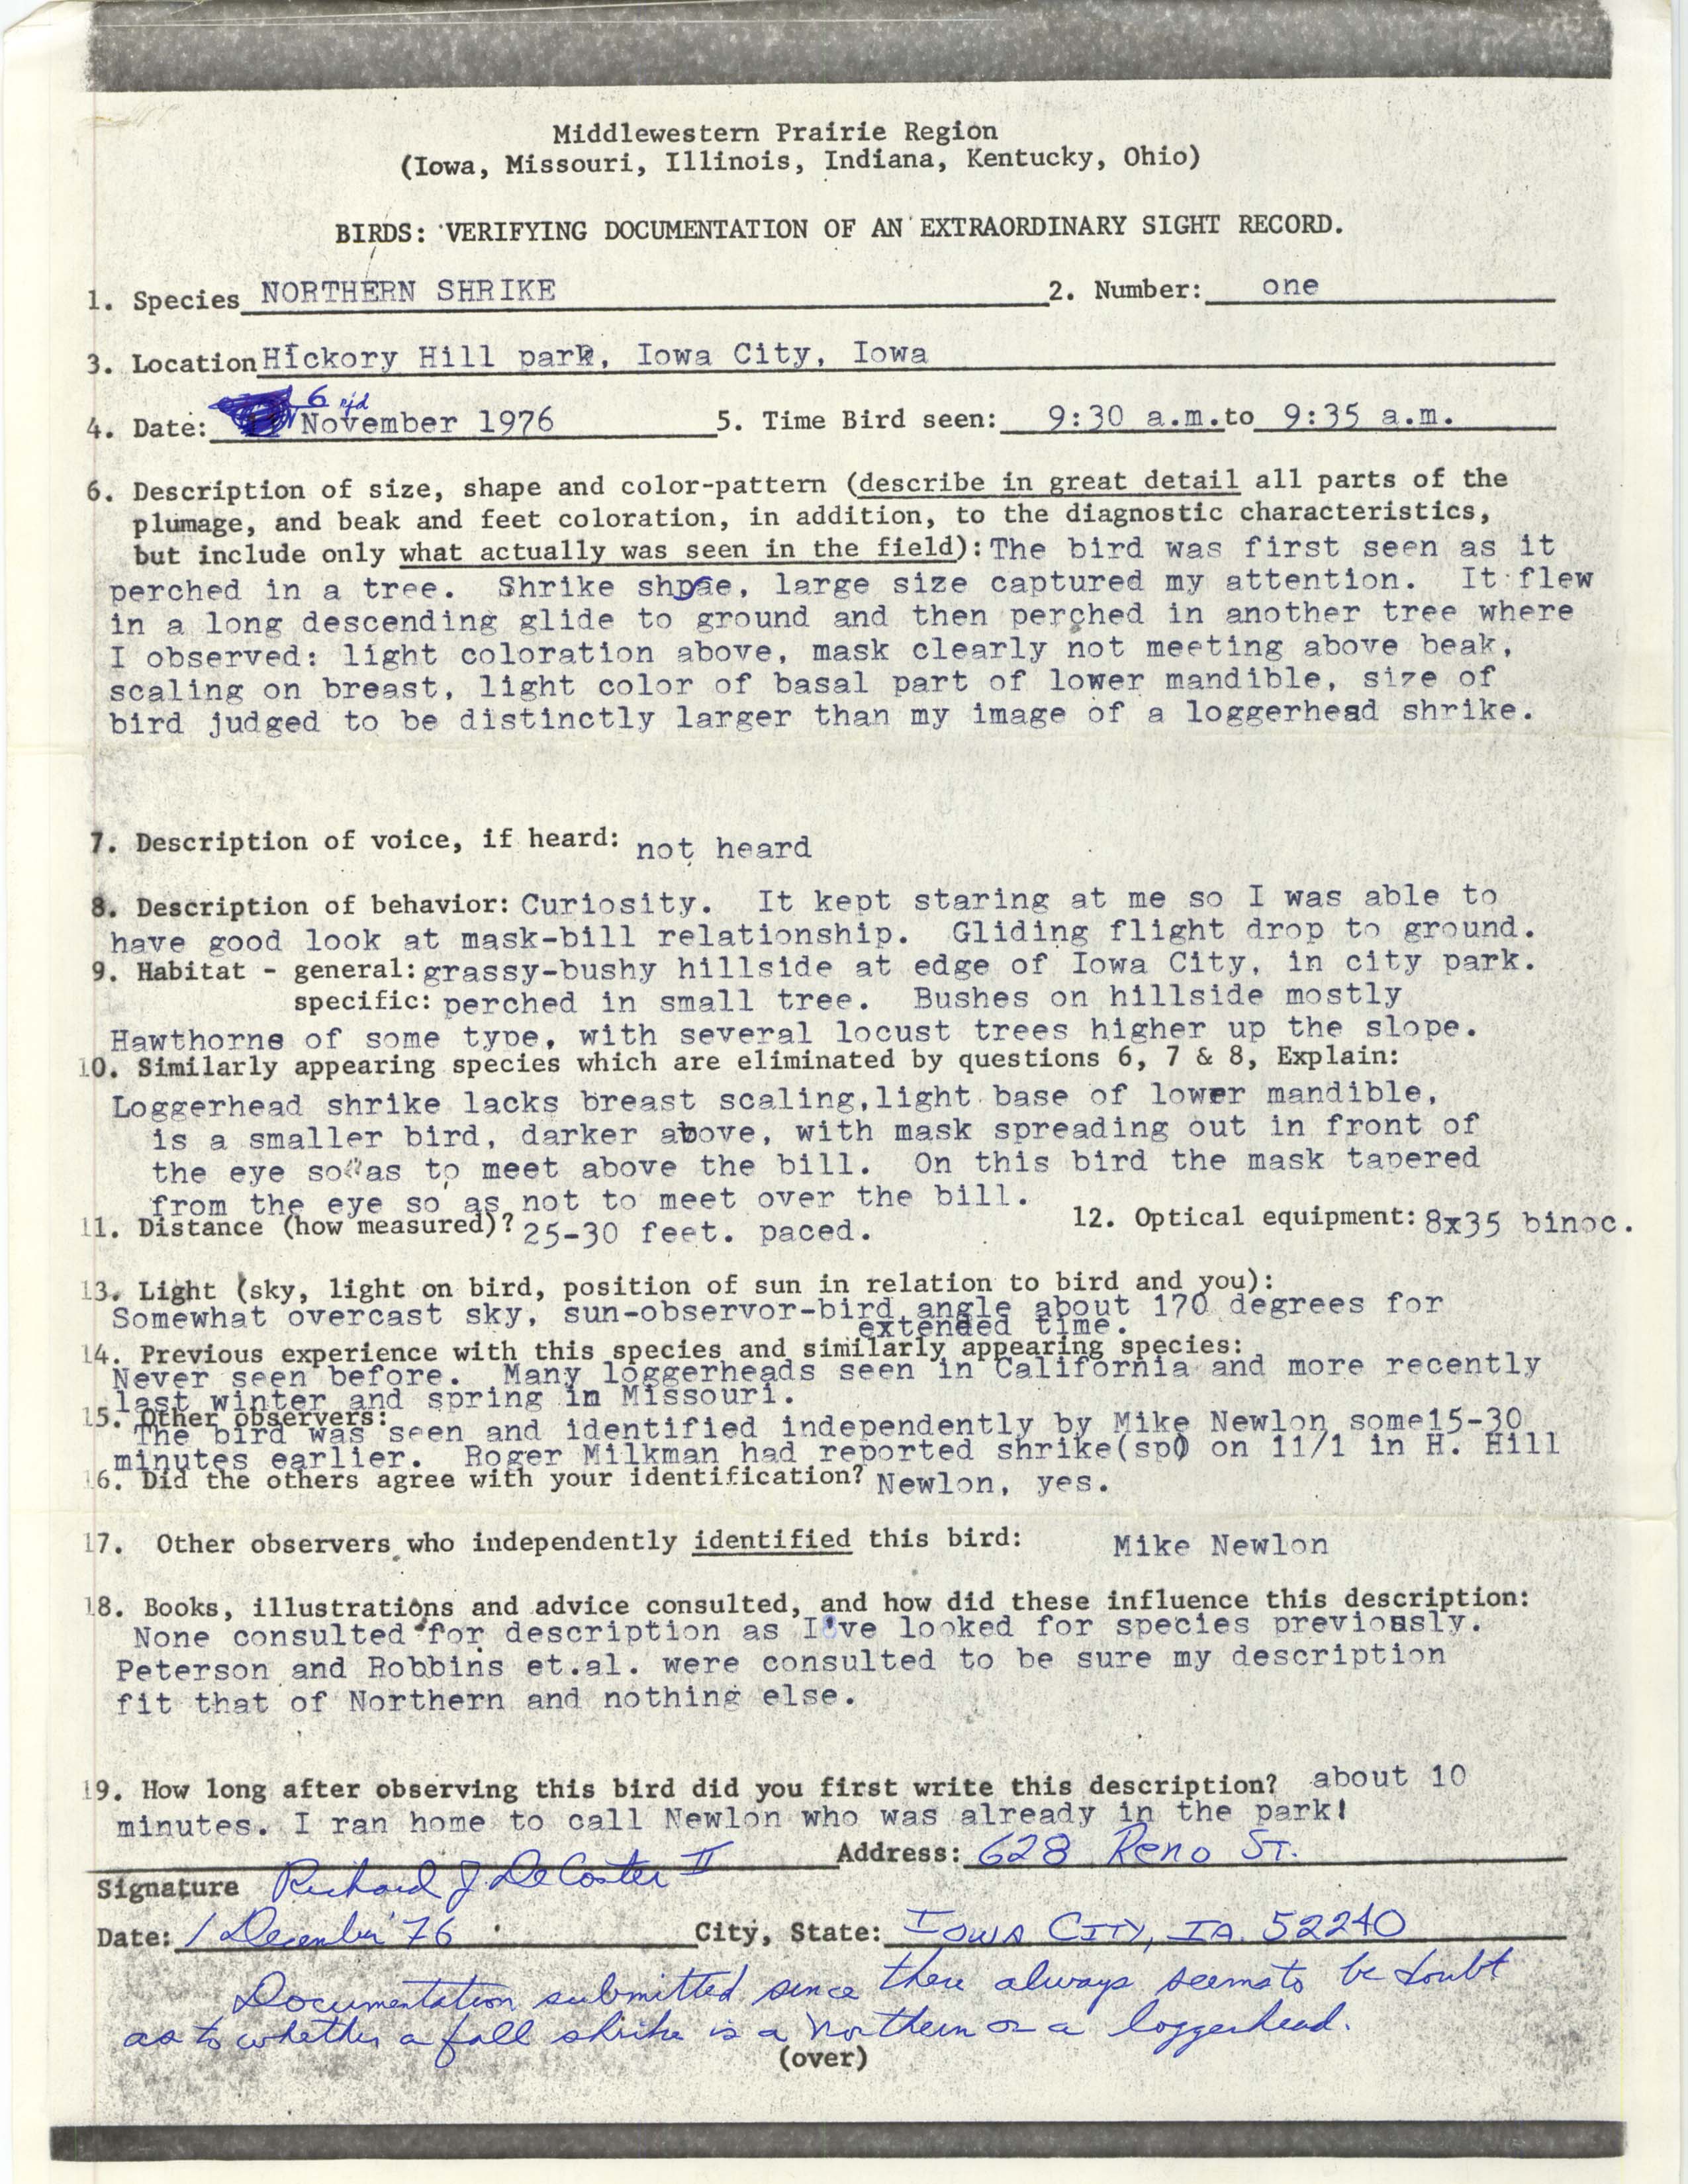 Rare bird documentation form for Northern Shrike at Hickory Hill Park in Iowa City, 1976